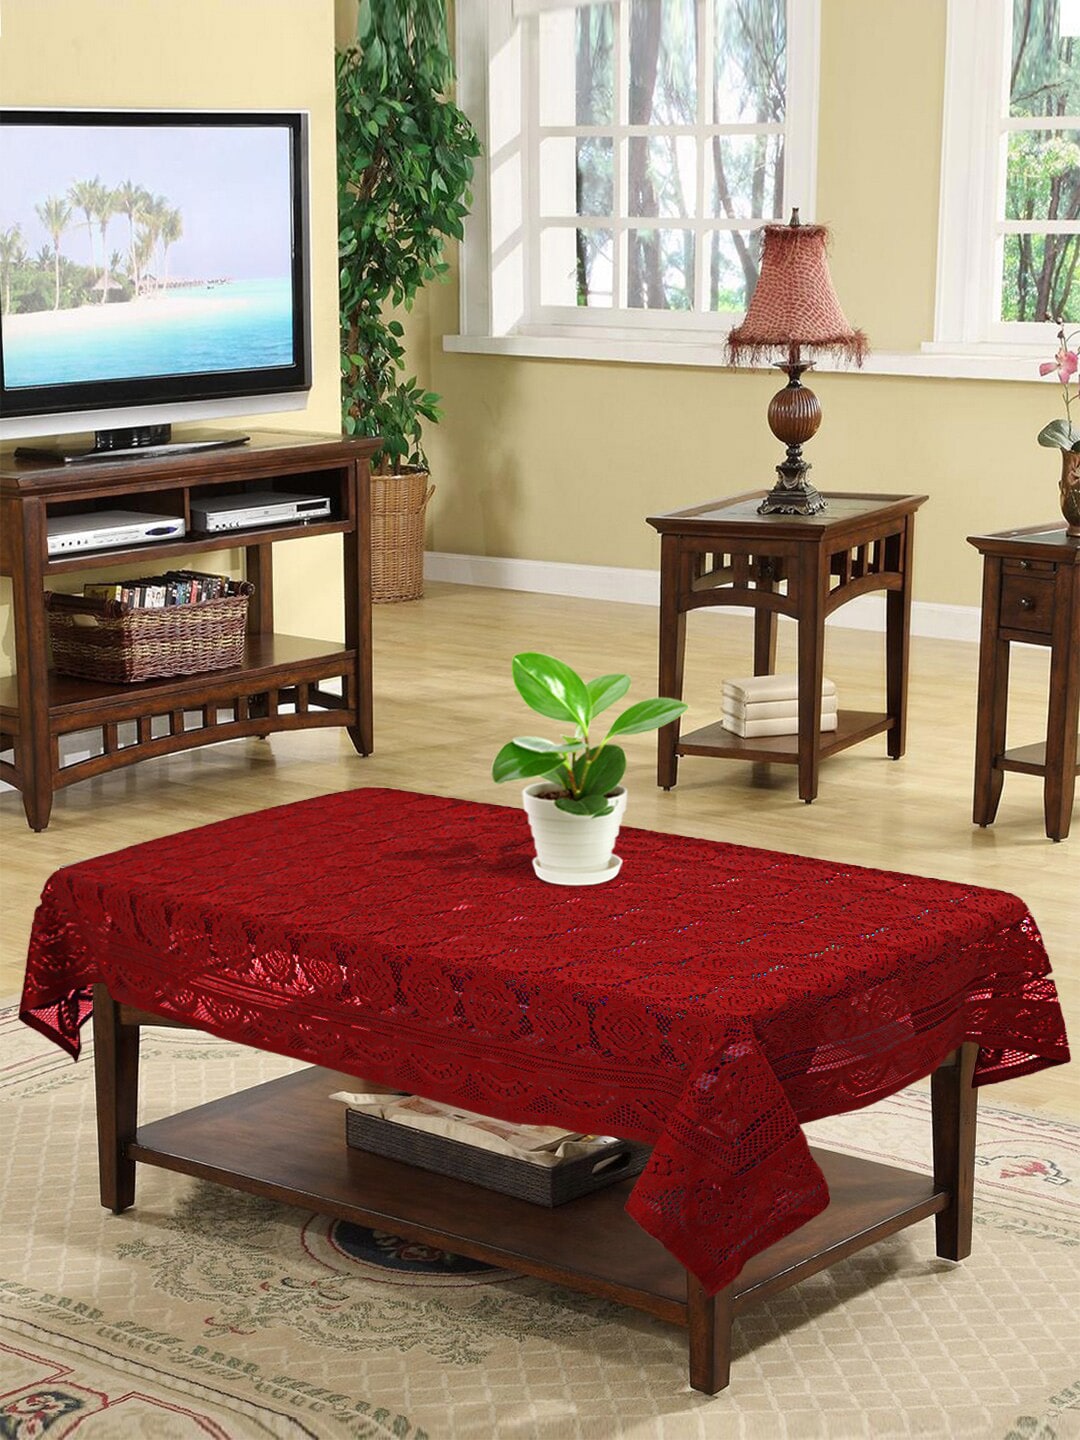 Kuber Industries Maroon & White Ethnic Motifs 4-Seater Rectangle Cotton Table Cover Price in India